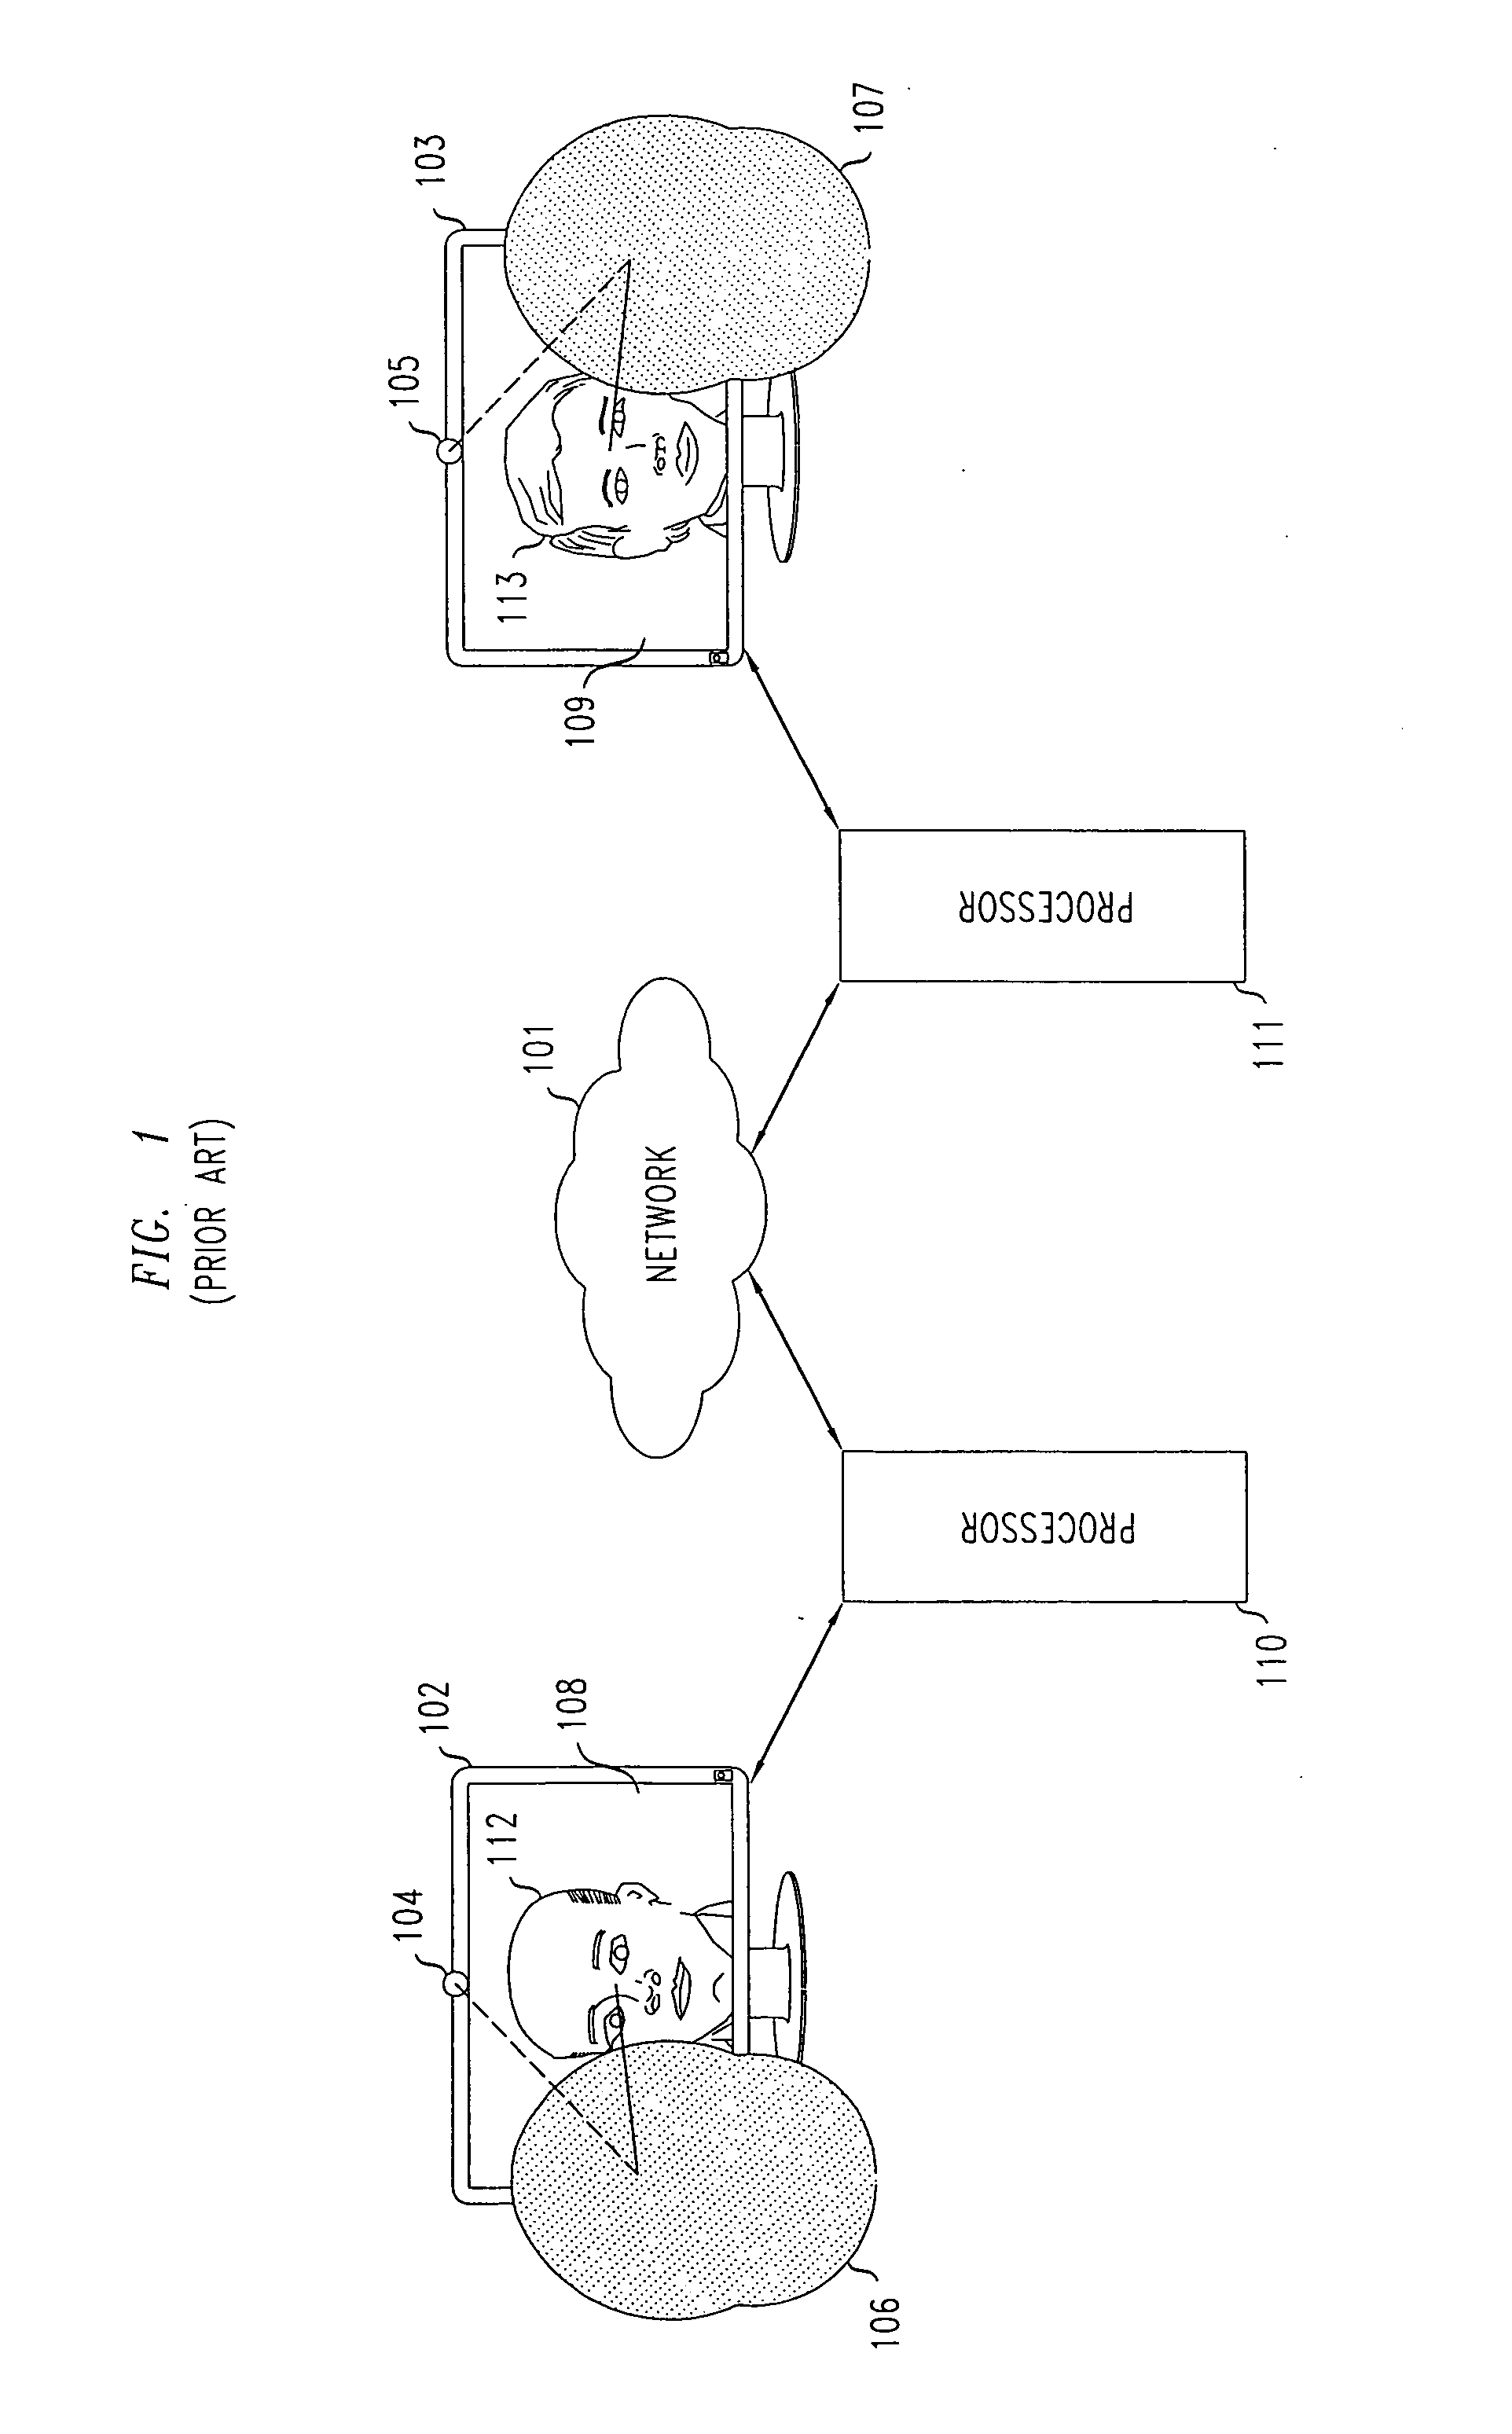 Method and apparatus for enabling improved eye contact in video teleconferencing applications